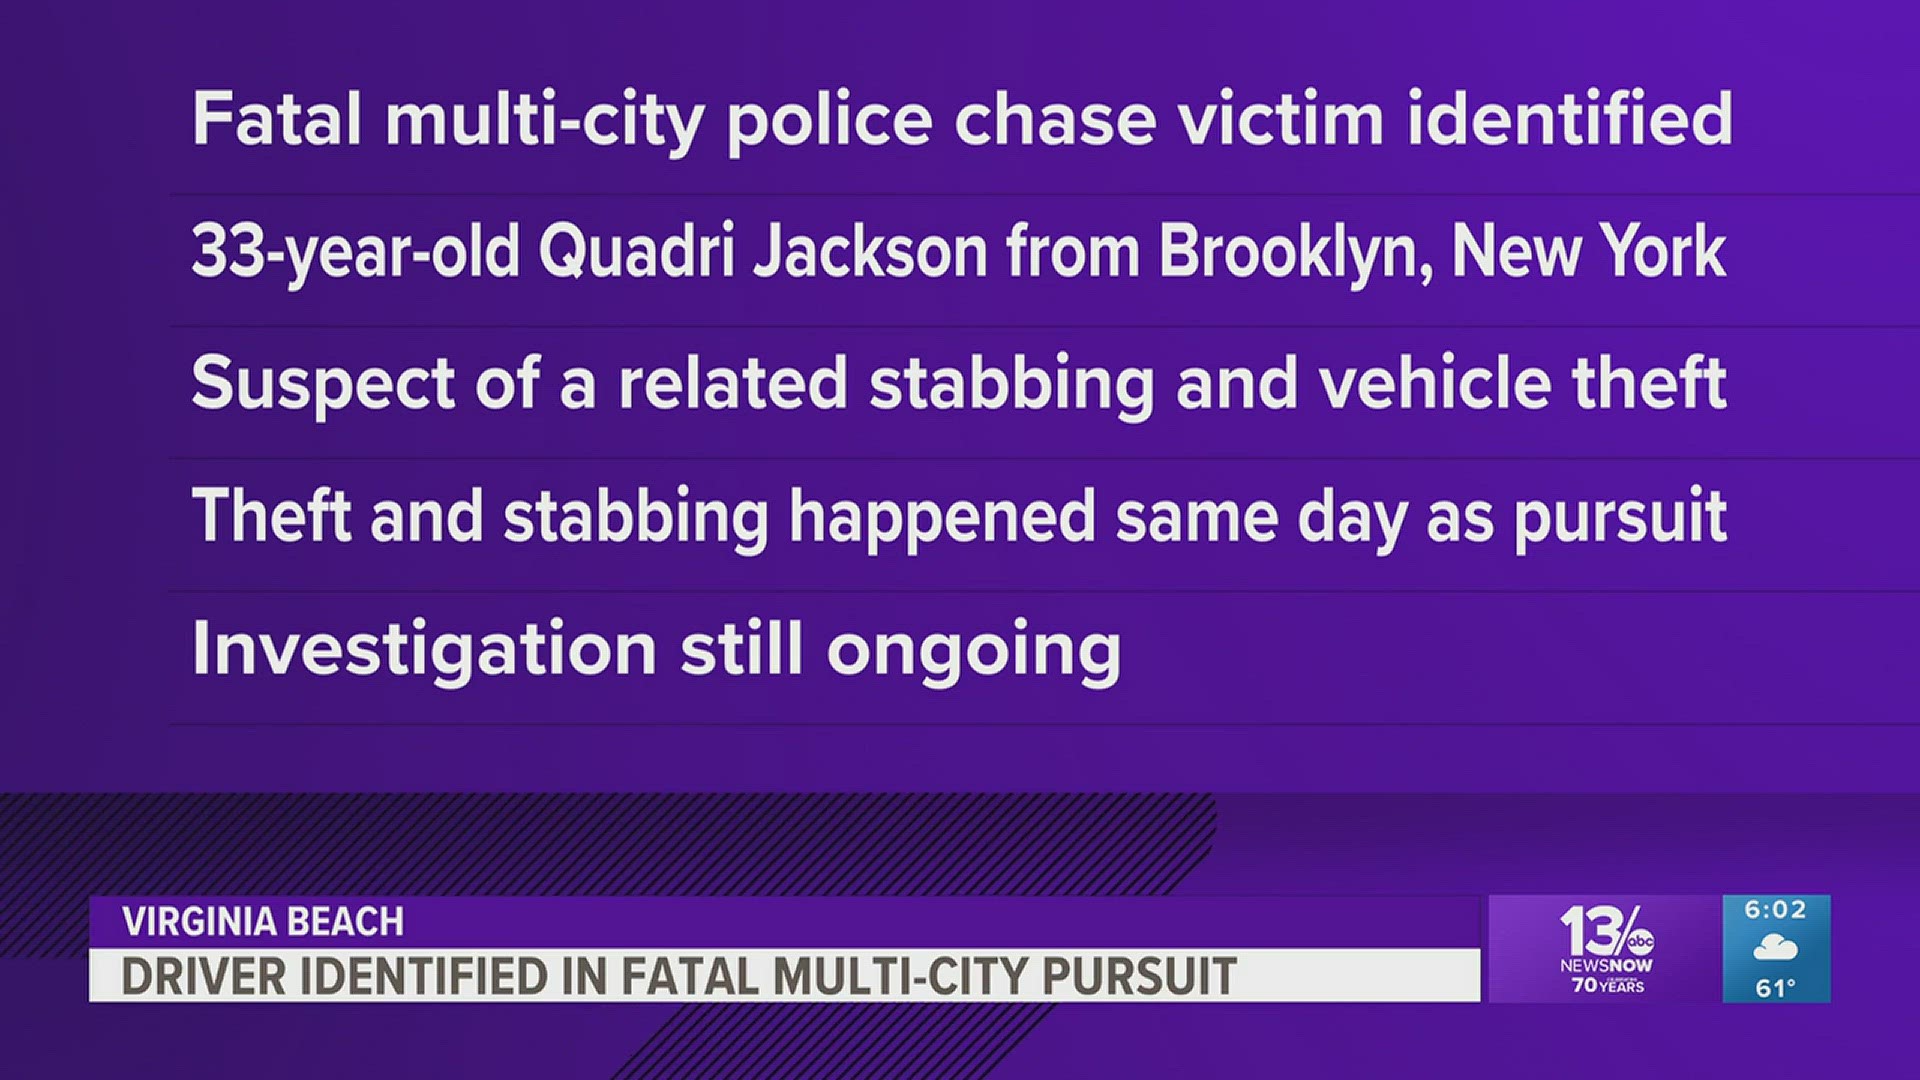 The victim of the deadly multi-city police chase that ended in Virginia Beach has been identified as 33-year-old Quadri Jackson of Brooklyn, New York.